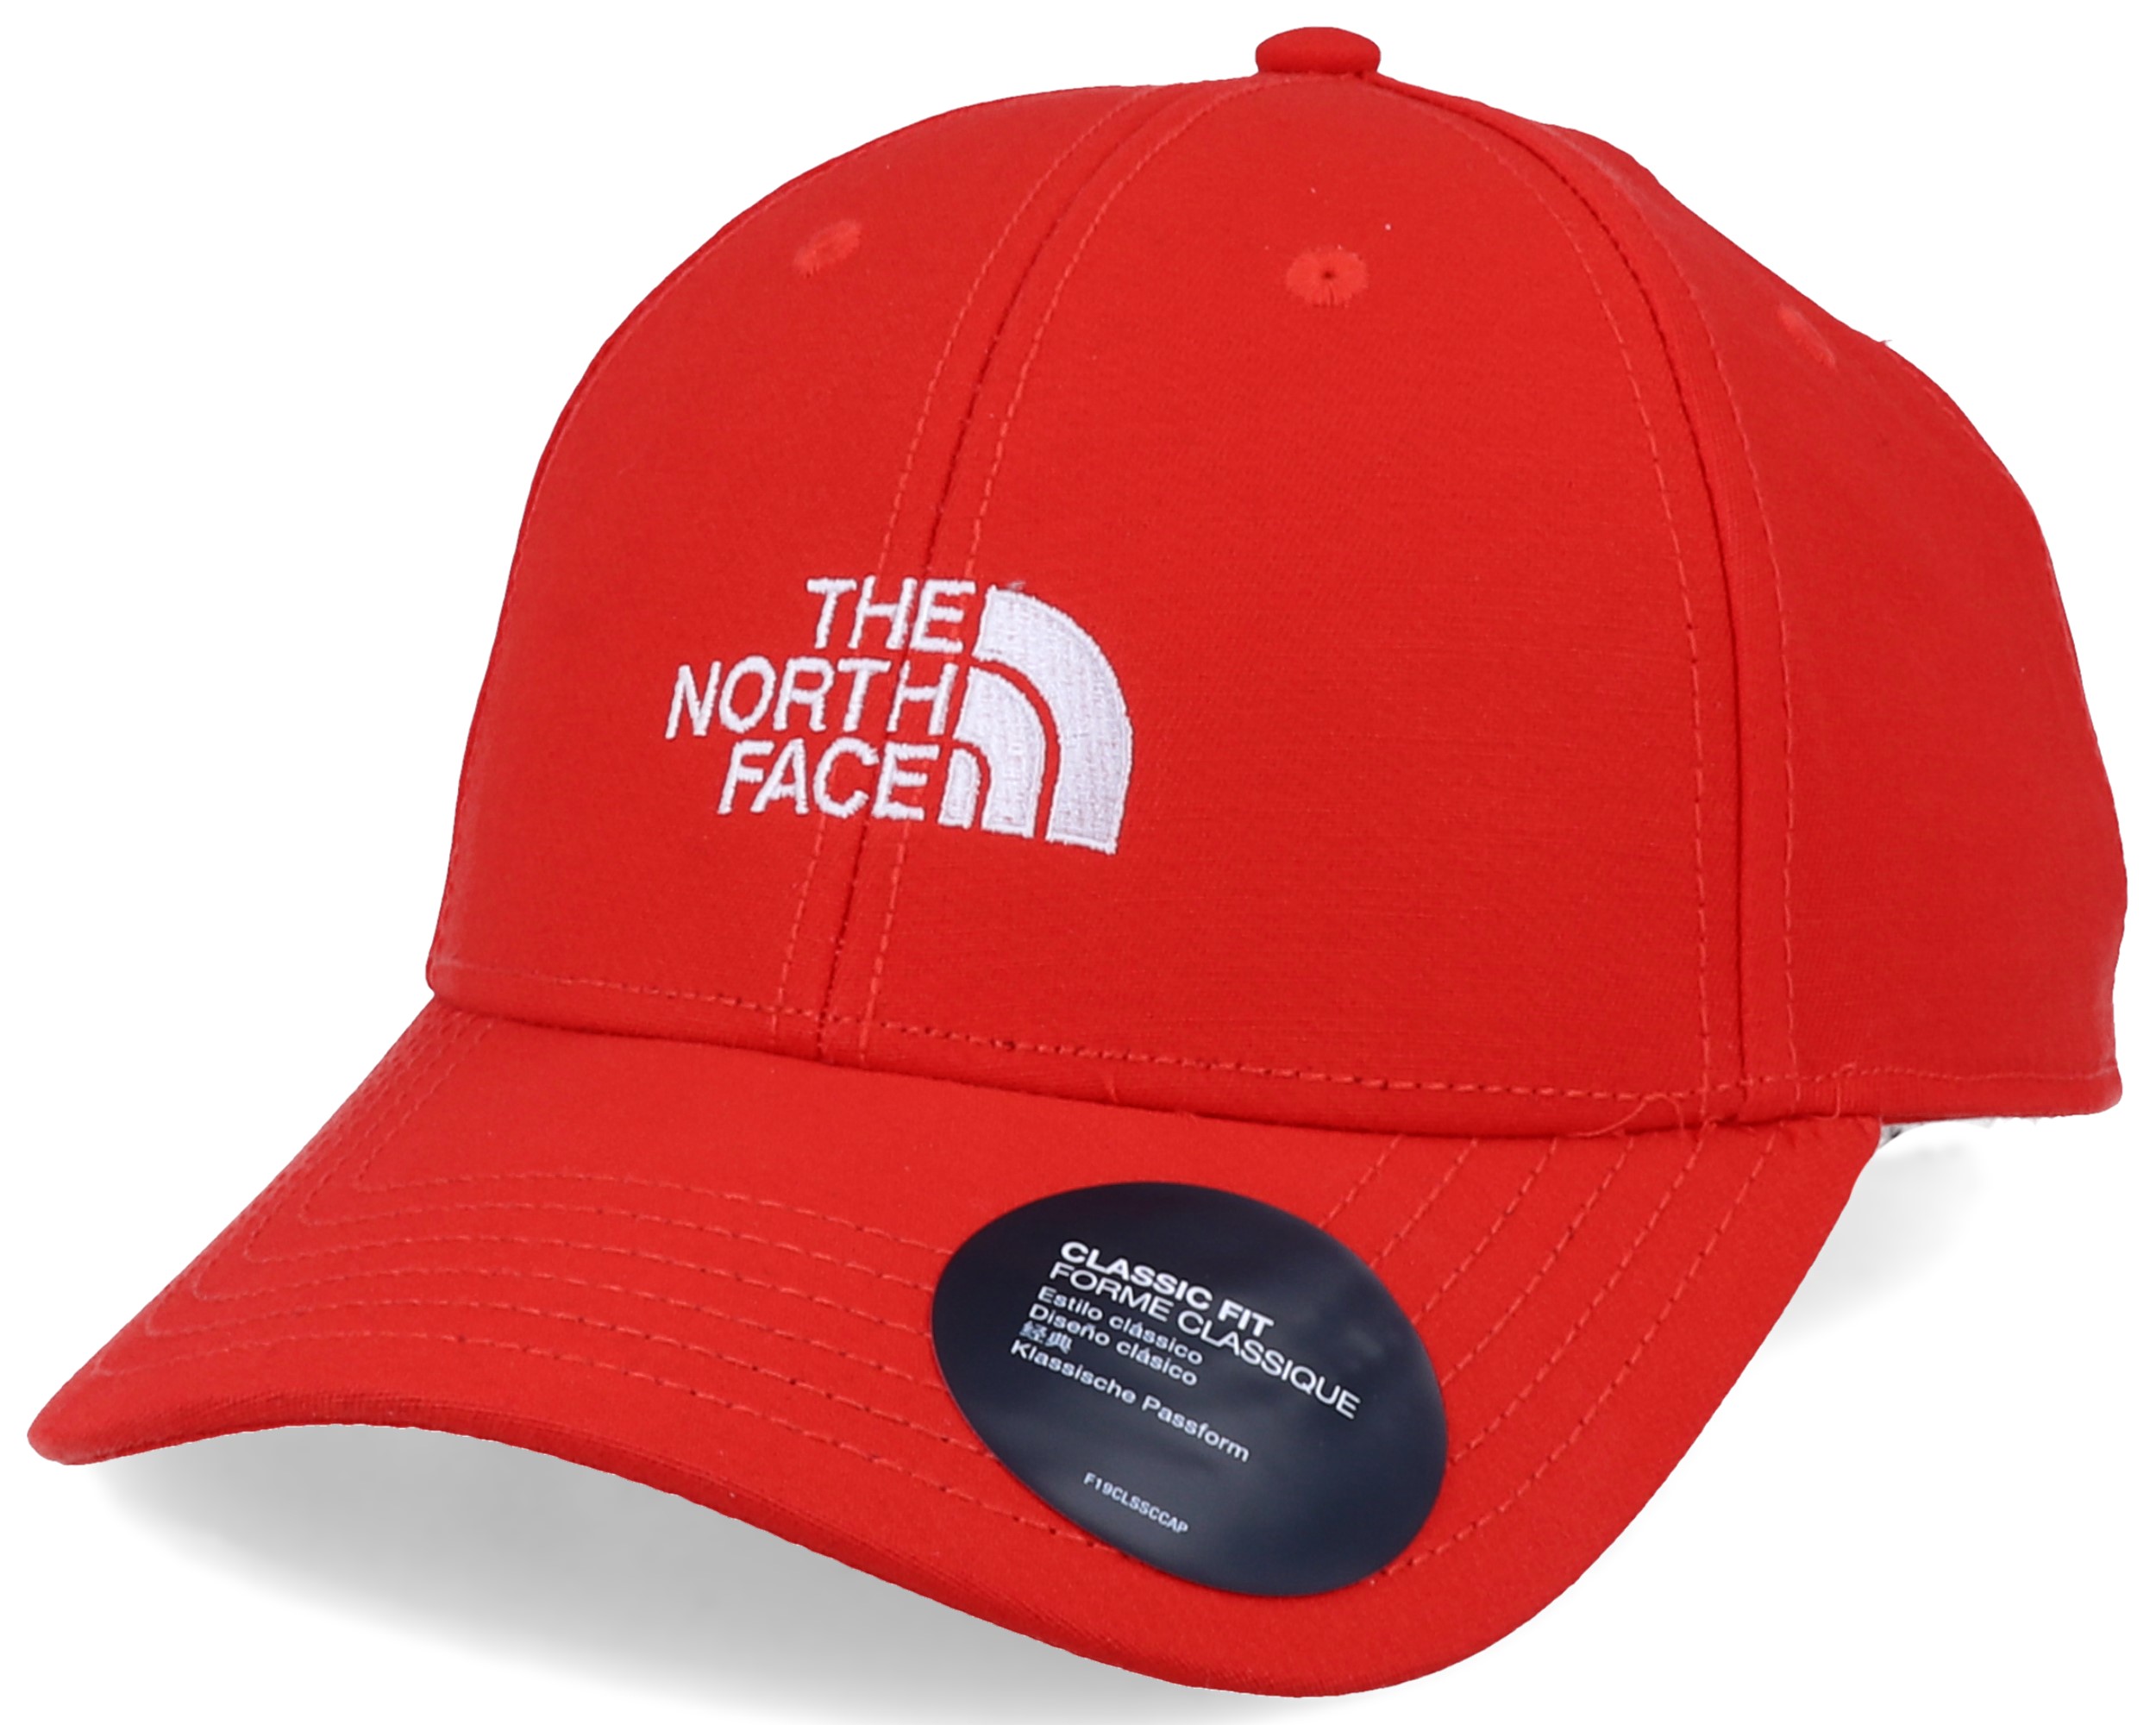 66 Classic Hat Fiery Red Adjustable - North Face caps | Hatstore.co.uk